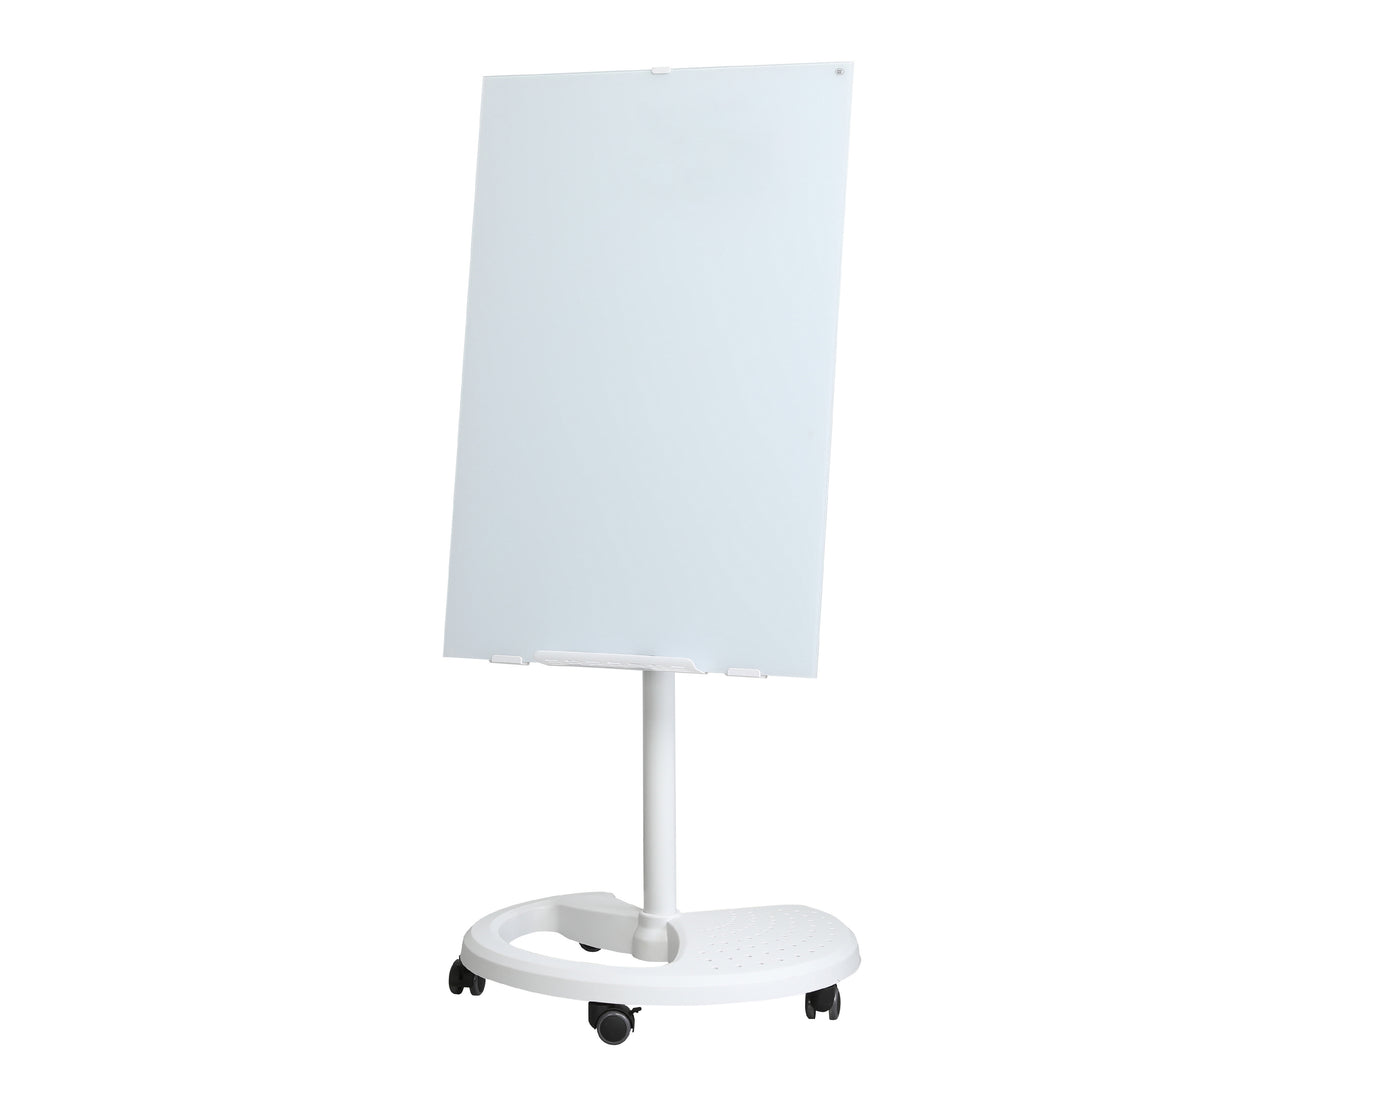 Logicfox Height Adjustment Portable Whiteboard with Tempered Glass